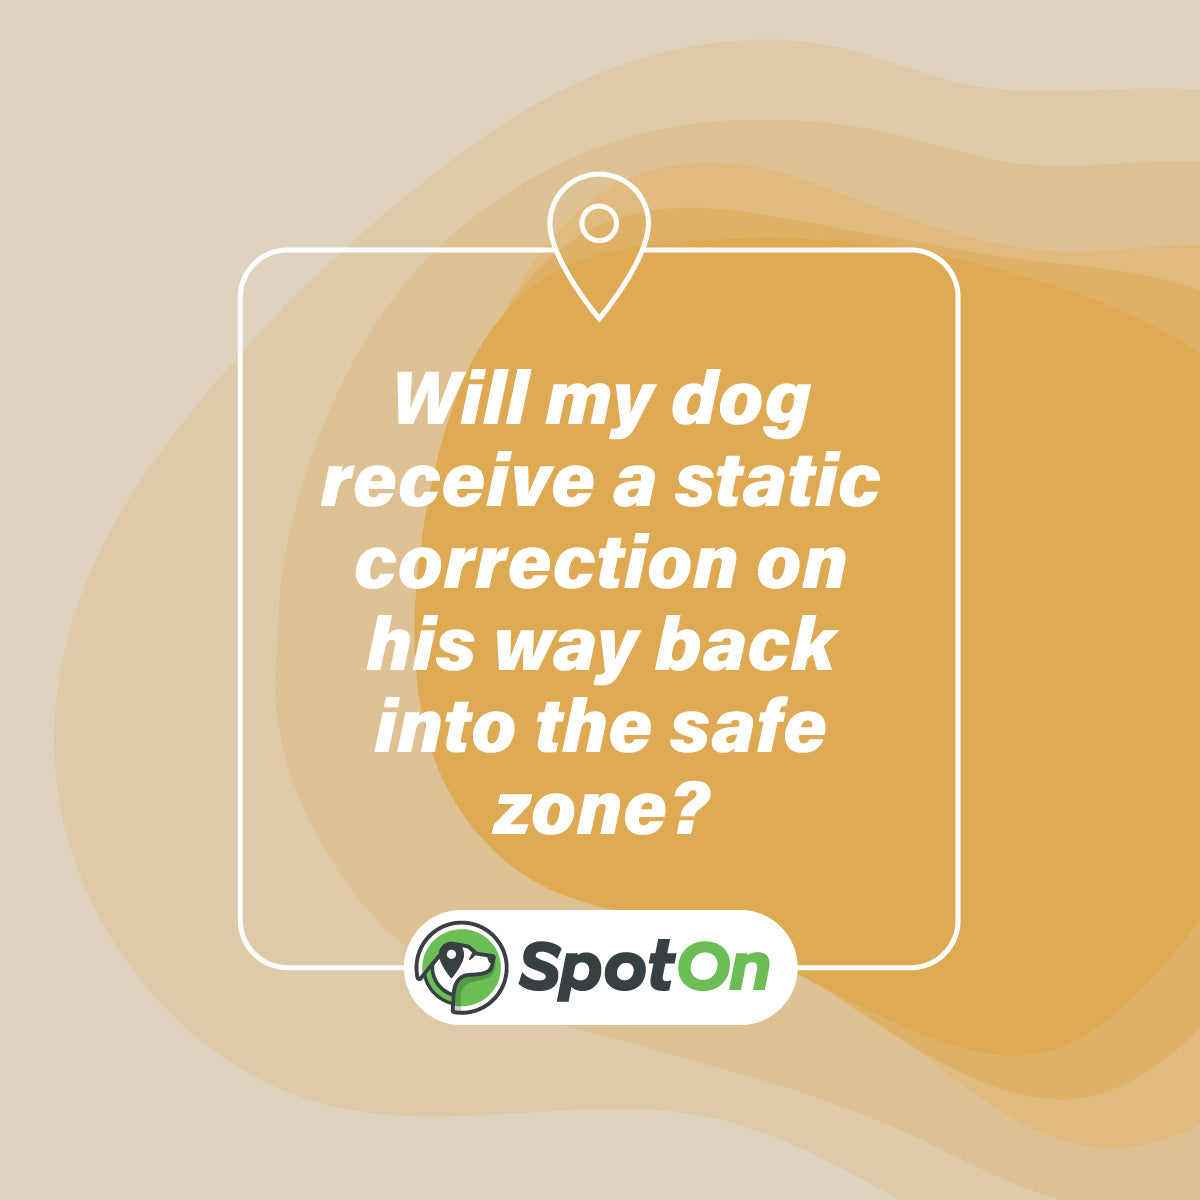 Will My Dog Receive a Static Correction For Returning to the Safe Zone?